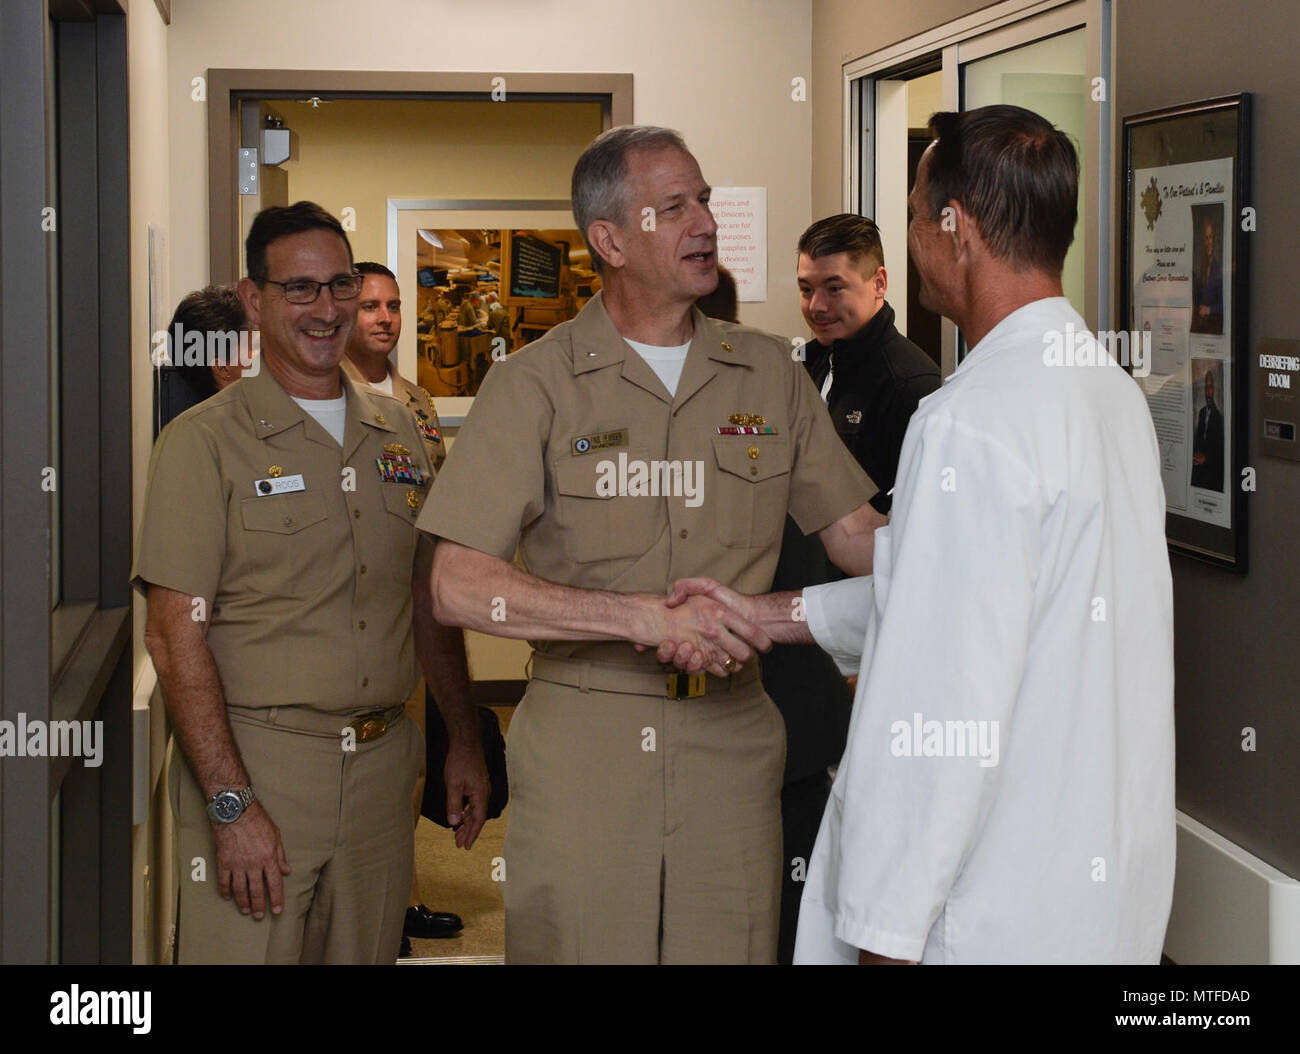 SAN DIEGO (April 24, 2017) Dr. Kerry King (right), medical director, Naval Medical Center San Diego (NMCSD) Surgical Simulation Center, greets Rear Arm. Paul Pearigen, commander, Navy Medicine West, before touring the training spaces. Pearigen toured NMCSD and visited the Medical and Surgical Sim Center, Bio Skills Training Center and Emergency Department before holding an Admiral’s call and answering Sailors’ questions. Stock Photo